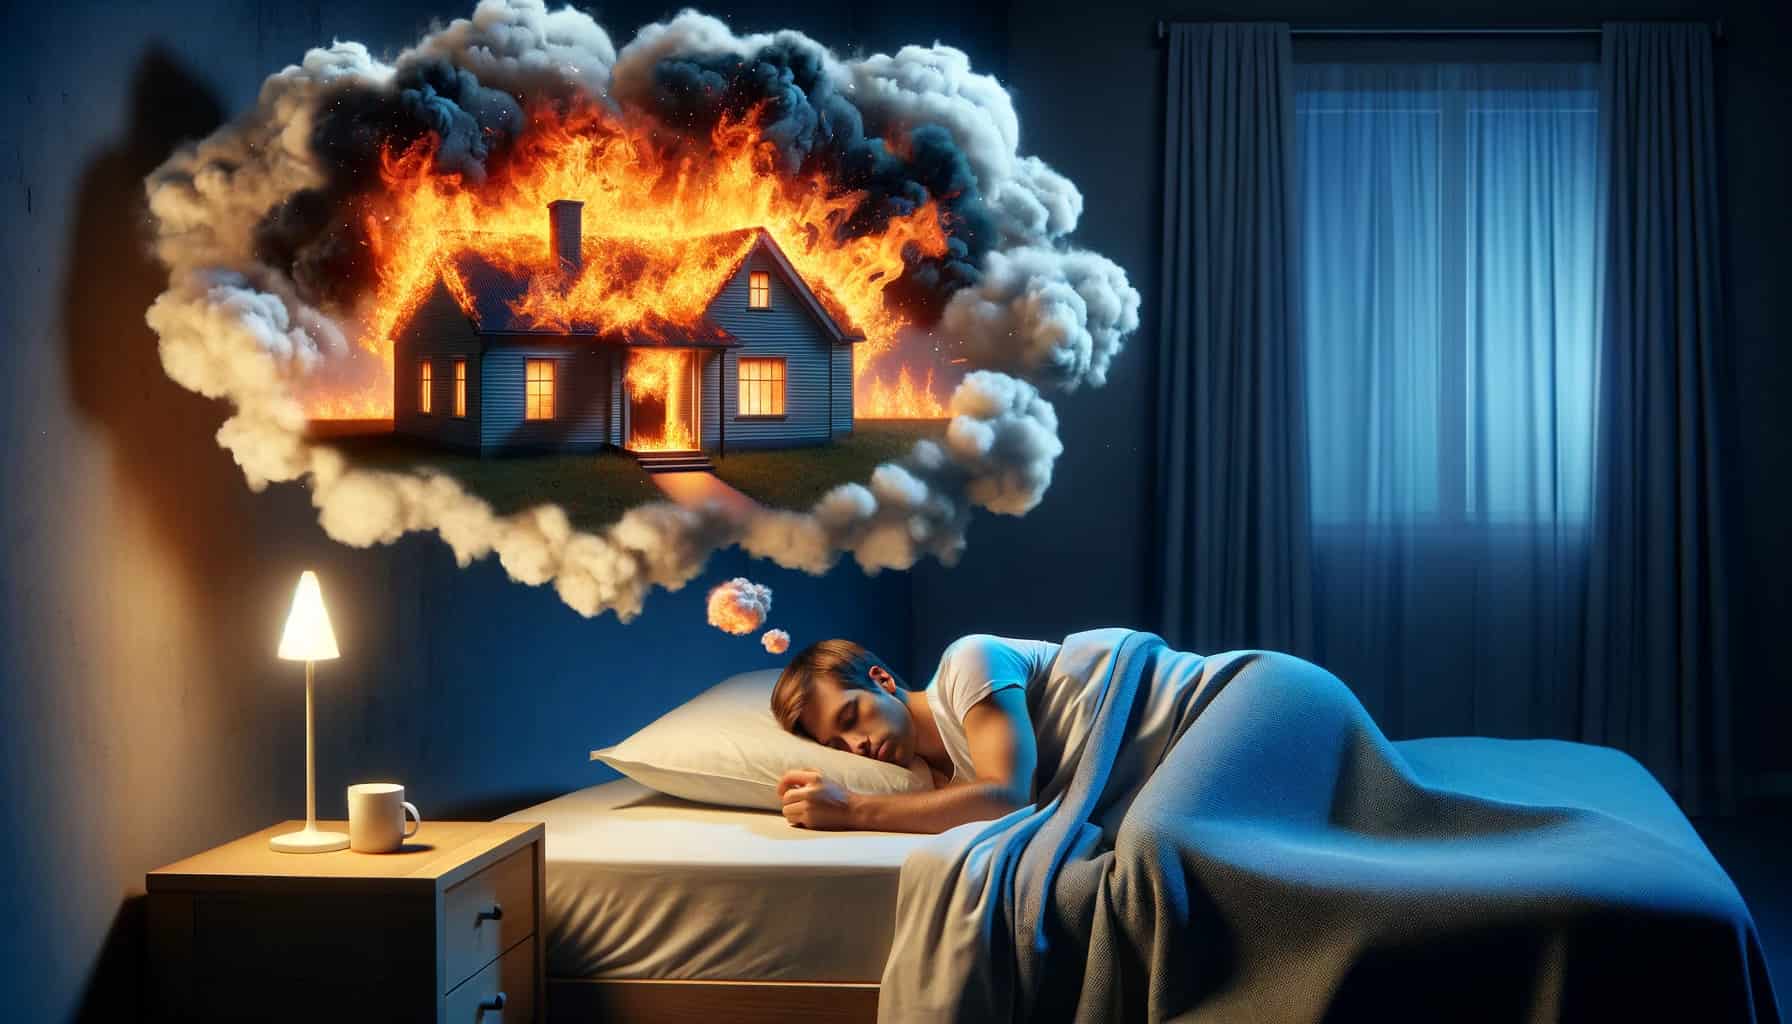 person asleep in bed dreaming of a house fire featured image